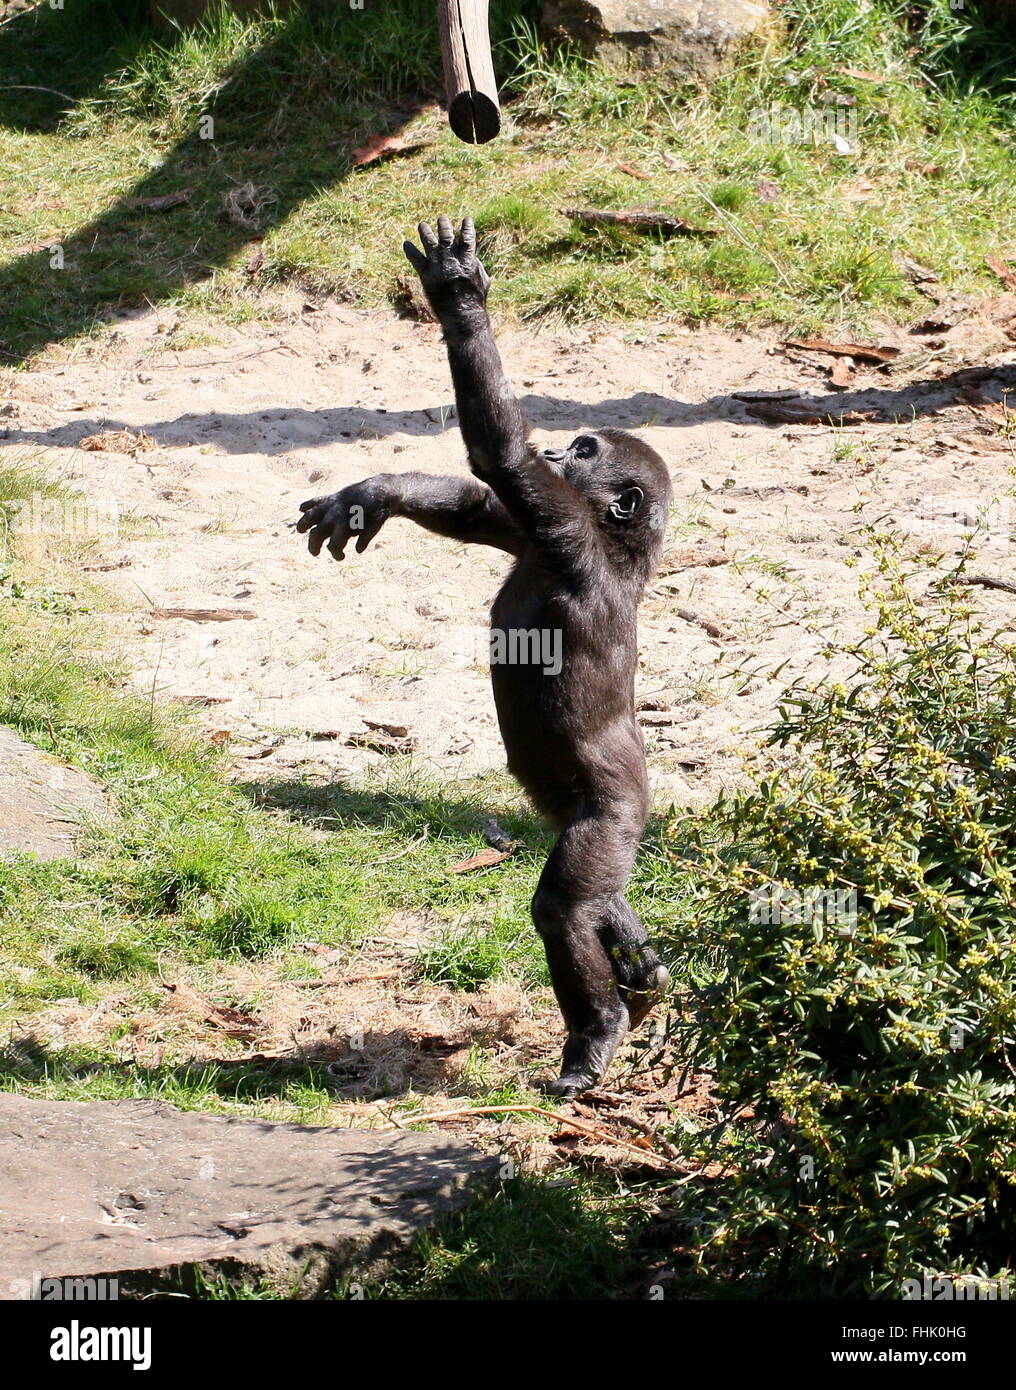 Young Lowland gorilla boy jumping up to grab hold of a branch Stock Photo